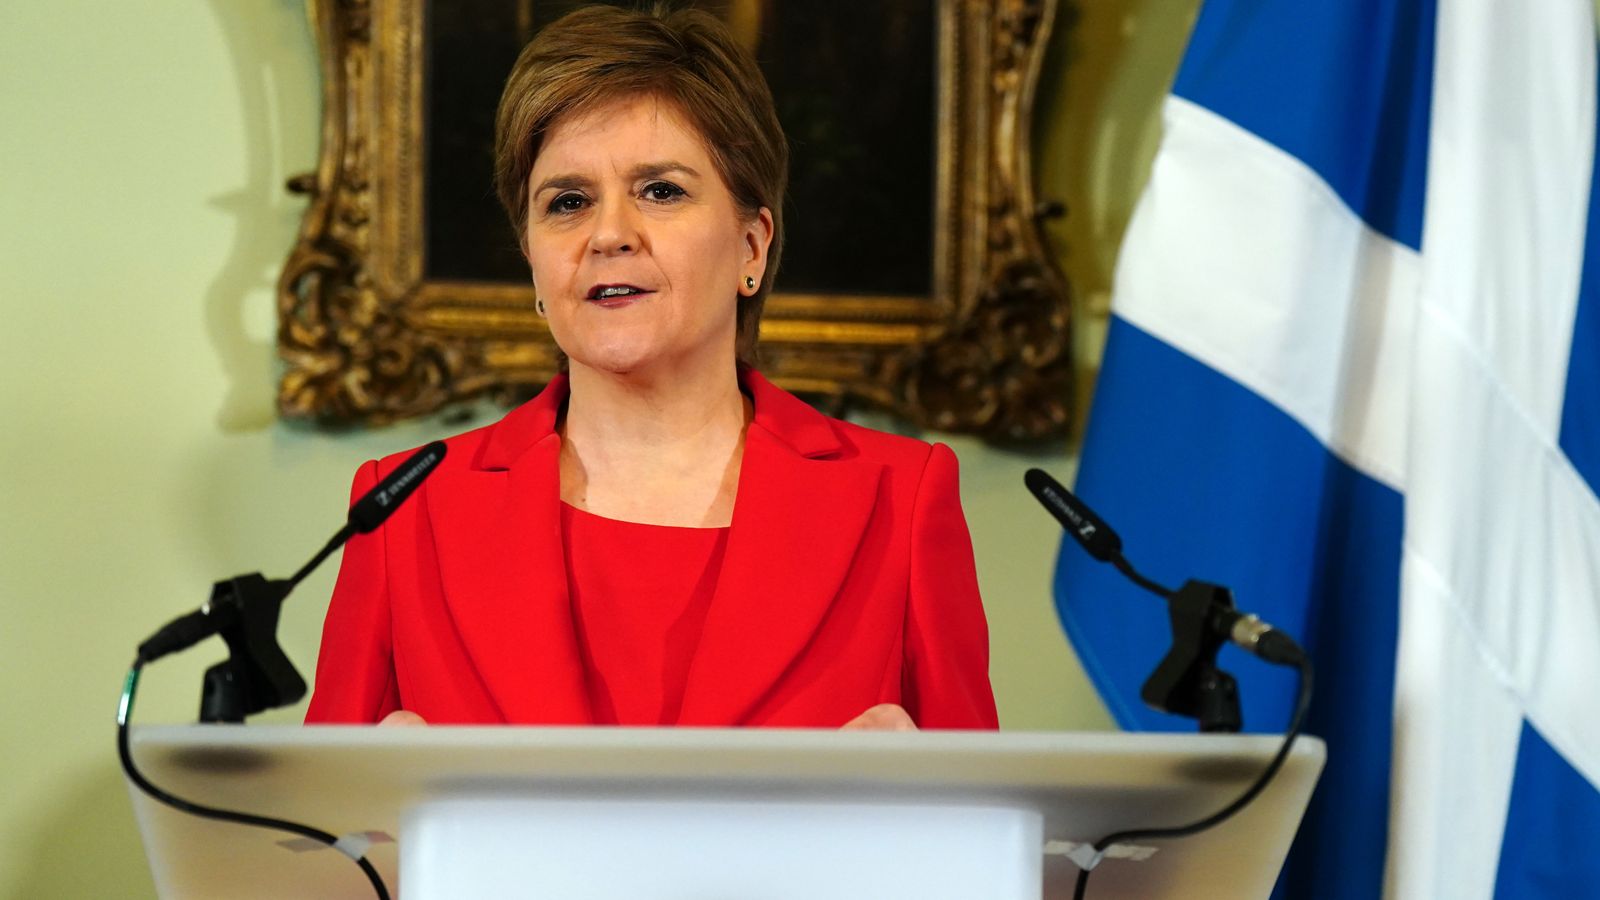 'In my head and in my heart, I know the time is now' - Nicola Sturgeon announces resignation as Scotland's first minister